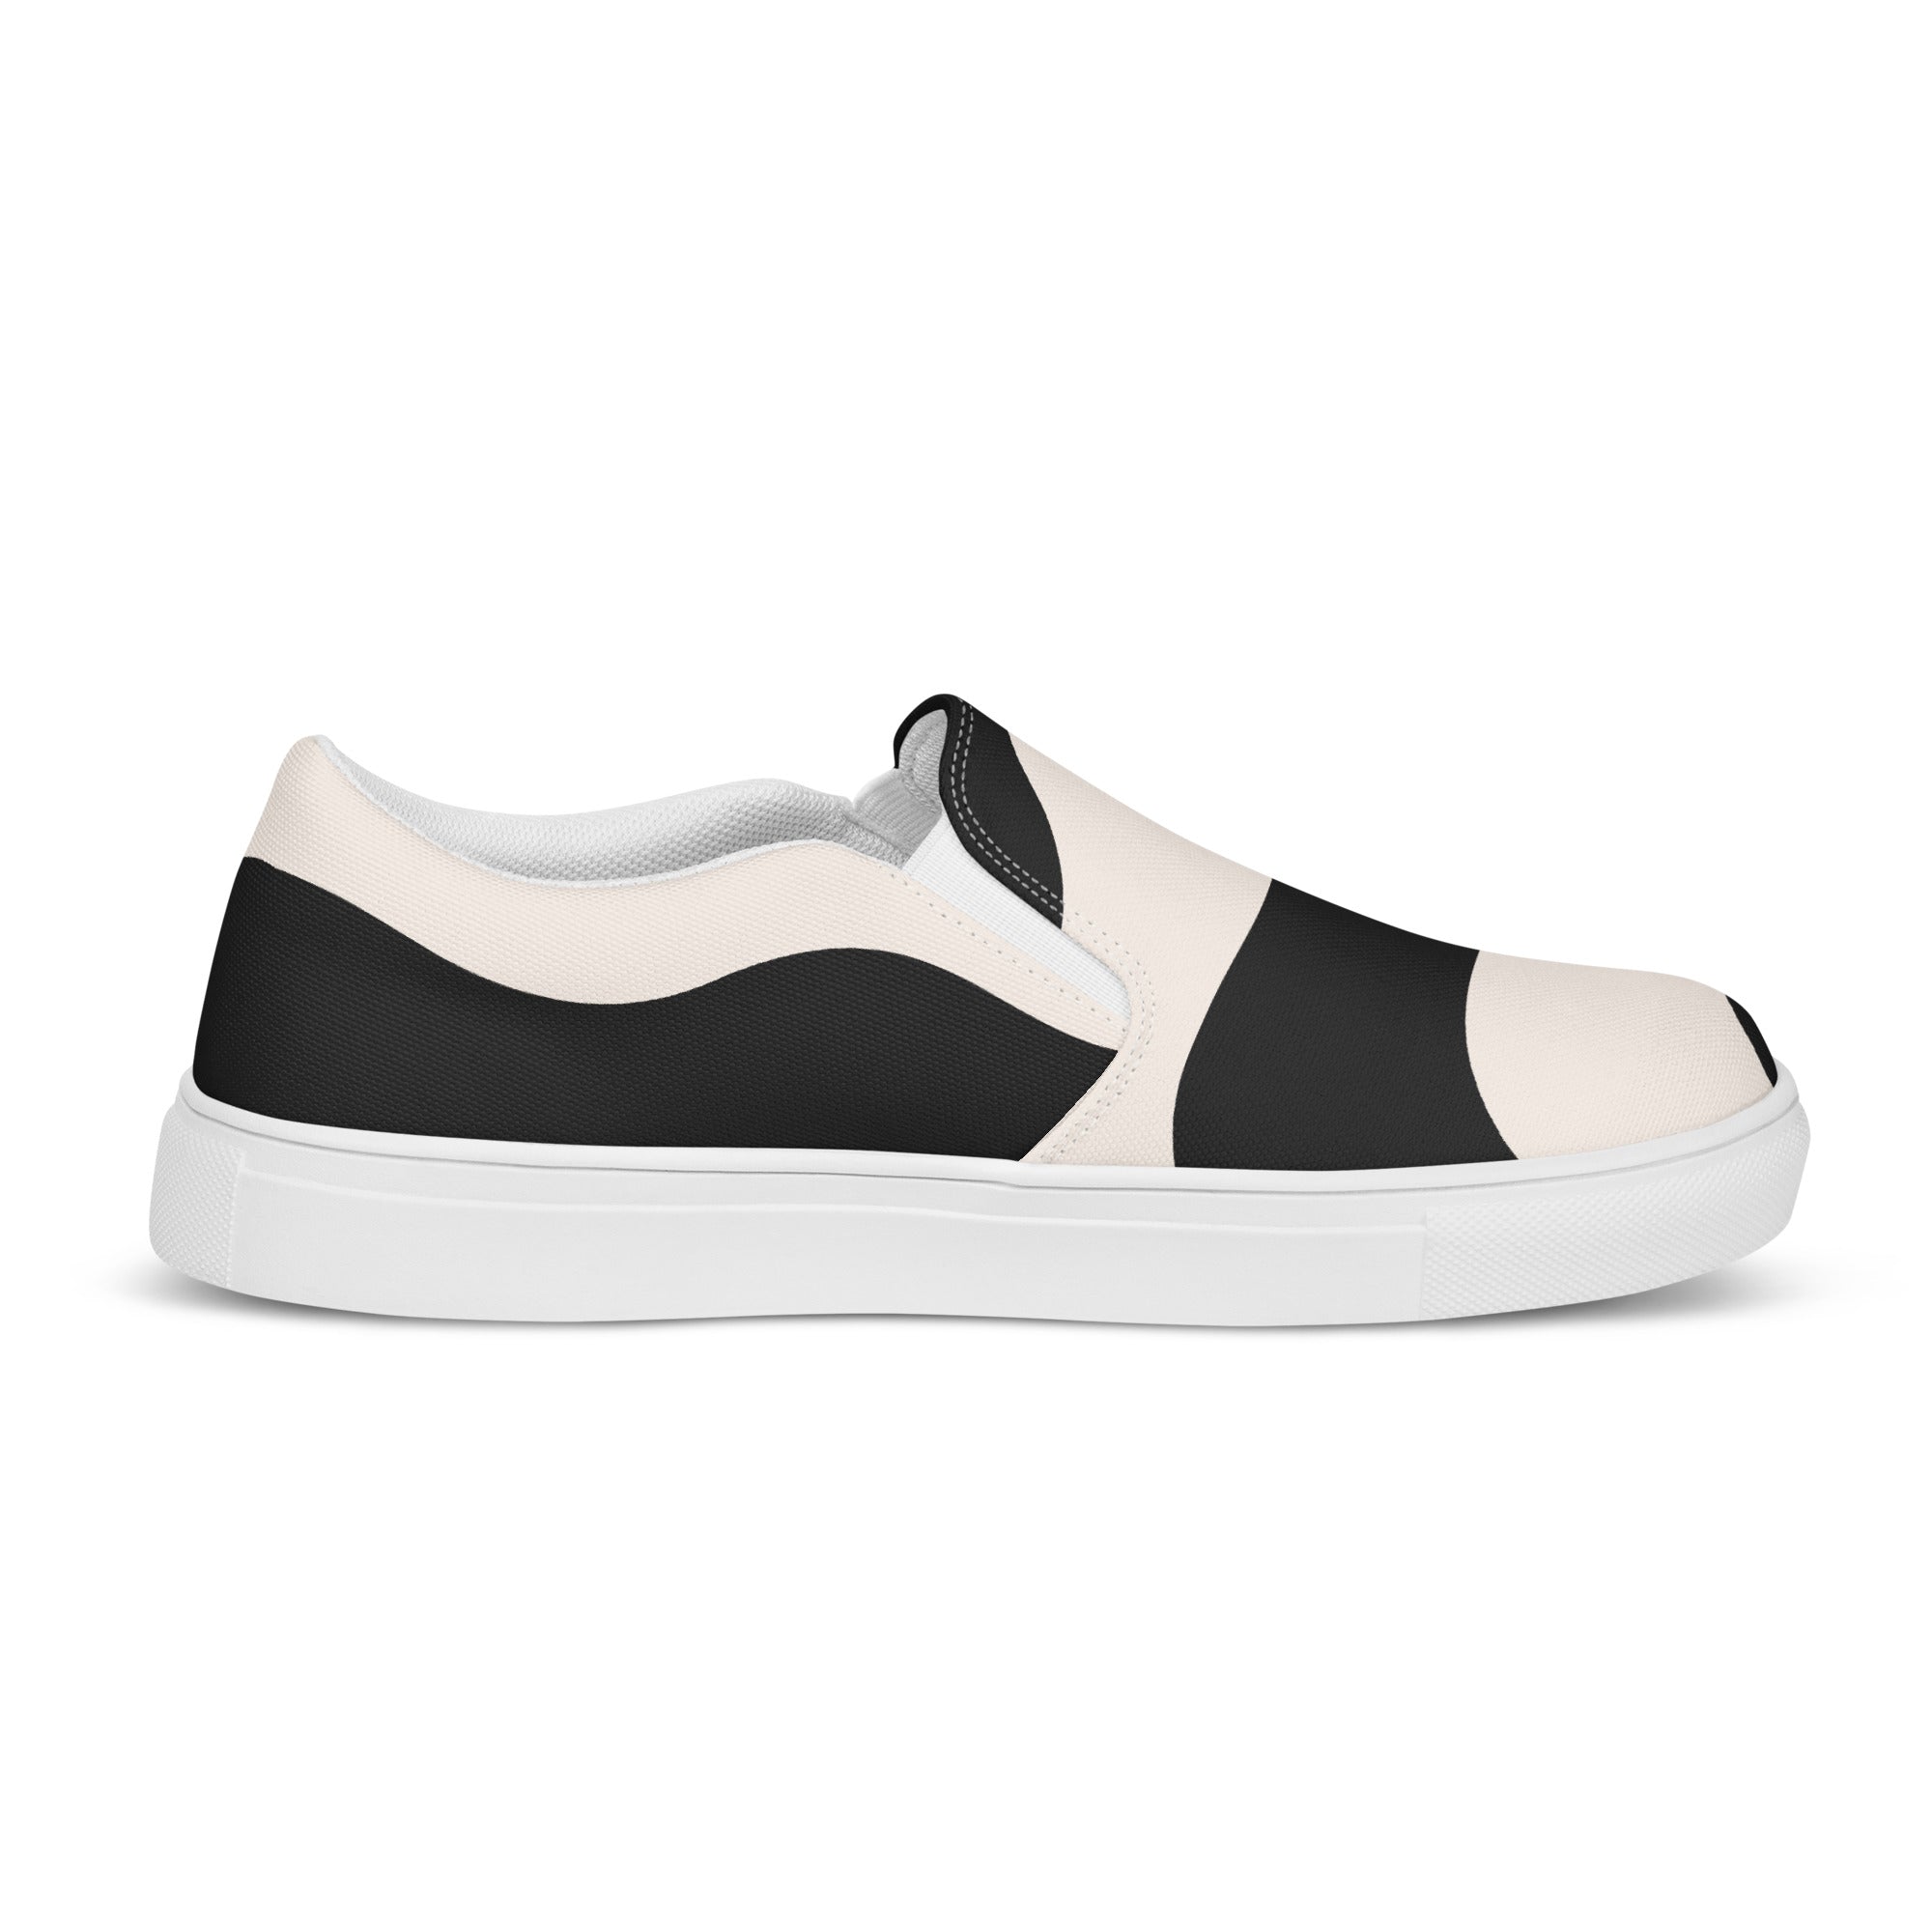 Wave Slip On Canvas Shoes